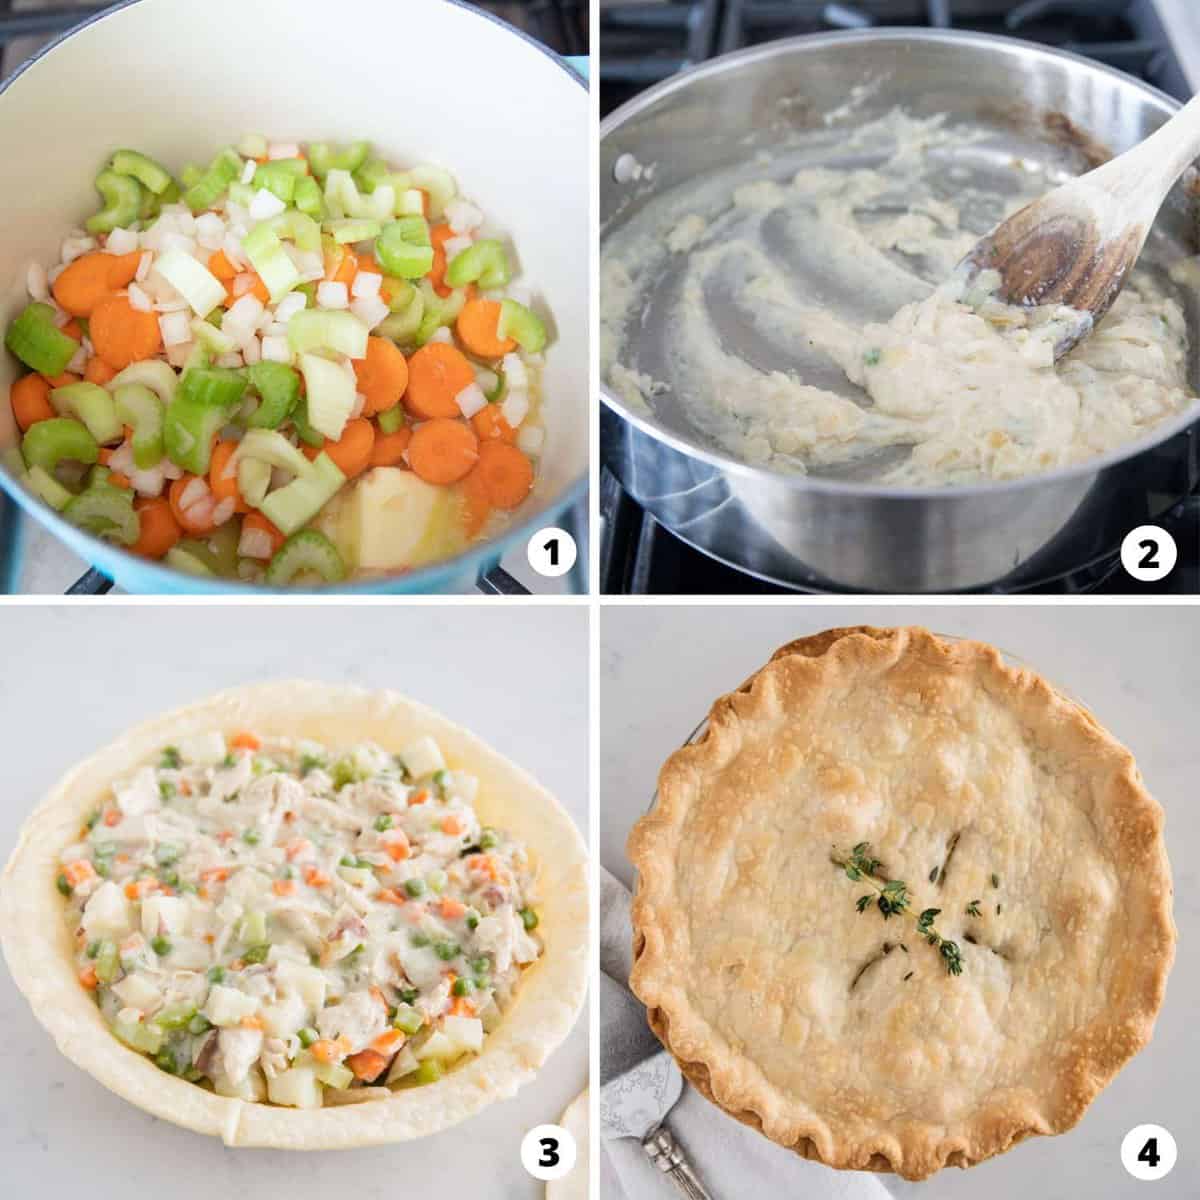 Showing how to make turkey pot pie in a 4 step collage.